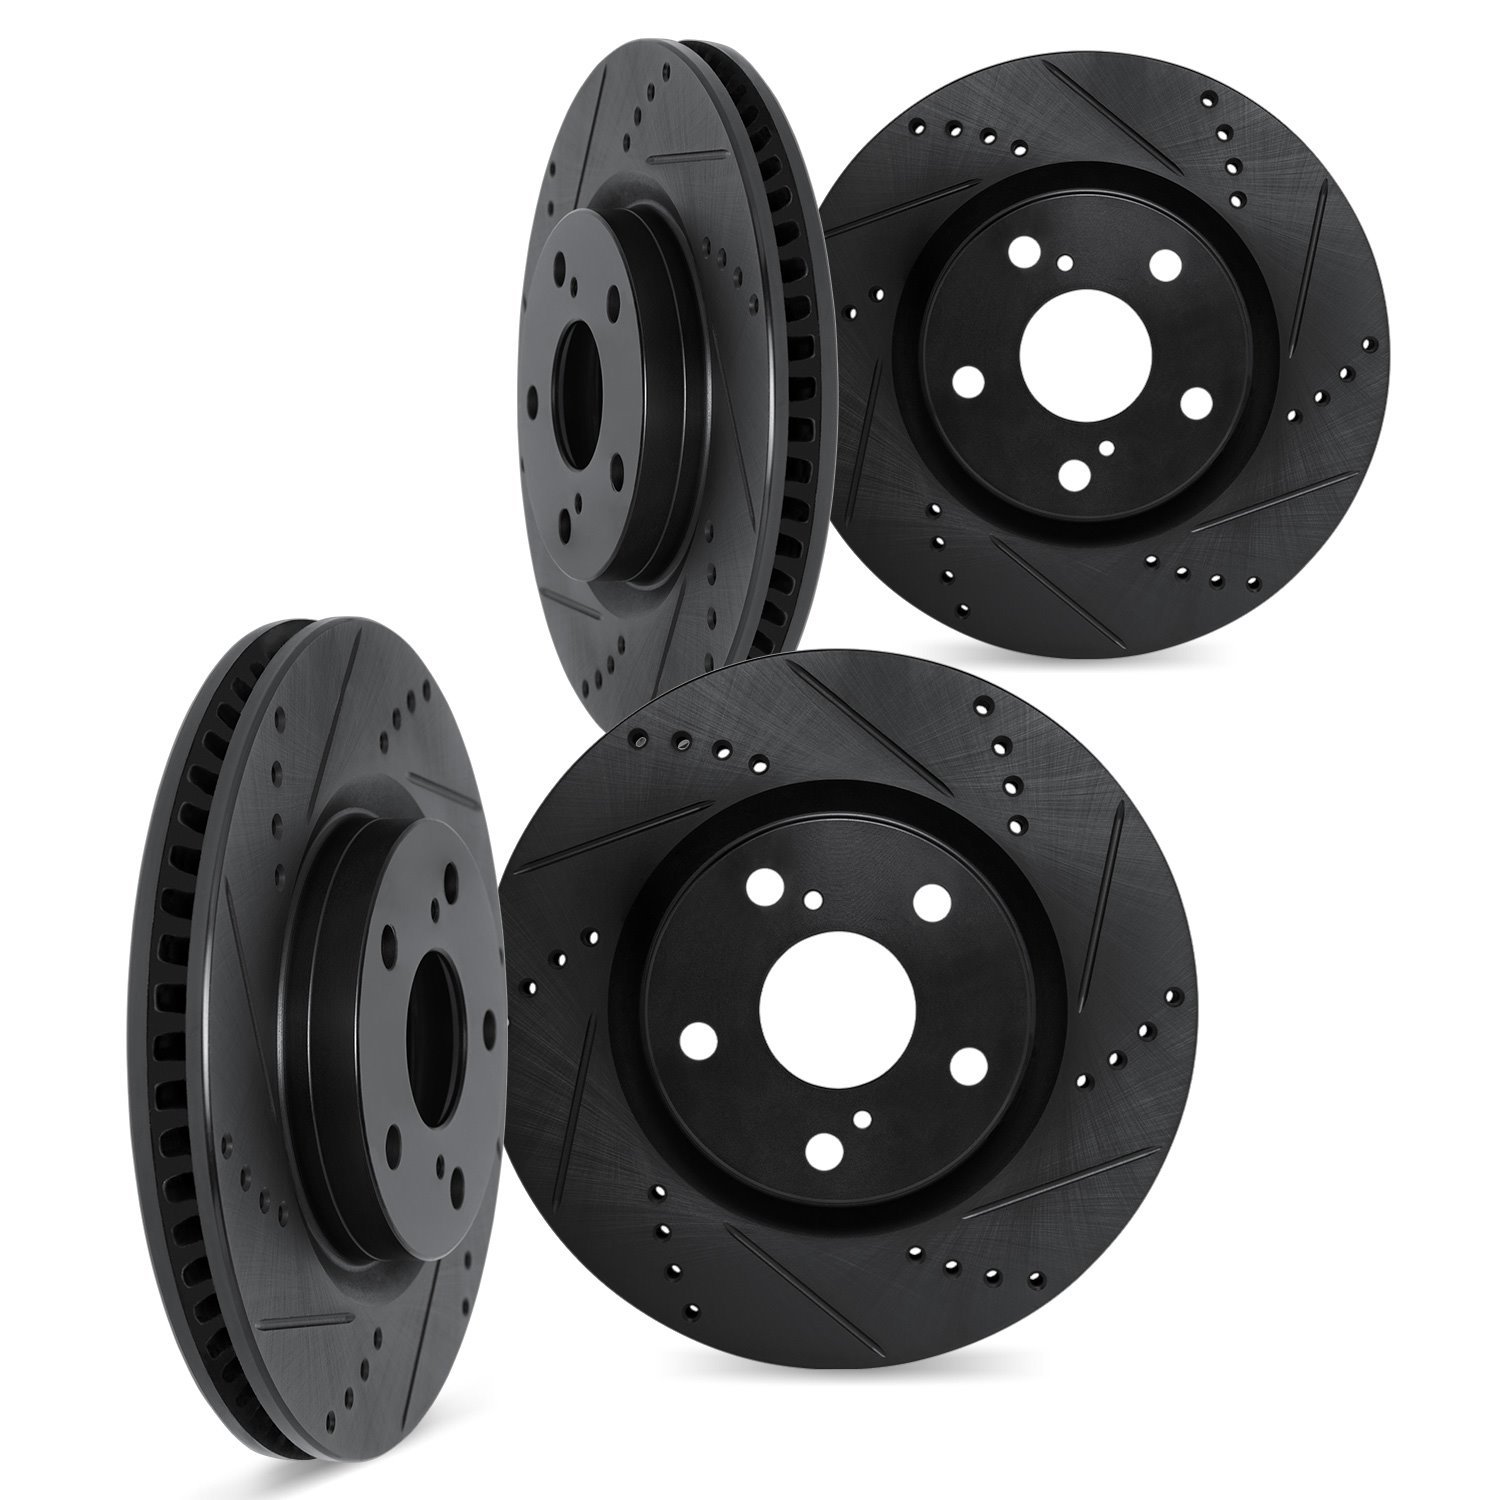 8004-02017 Drilled/Slotted Brake Rotors [Black], 1987-1989 Porsche, Position: Front and Rear